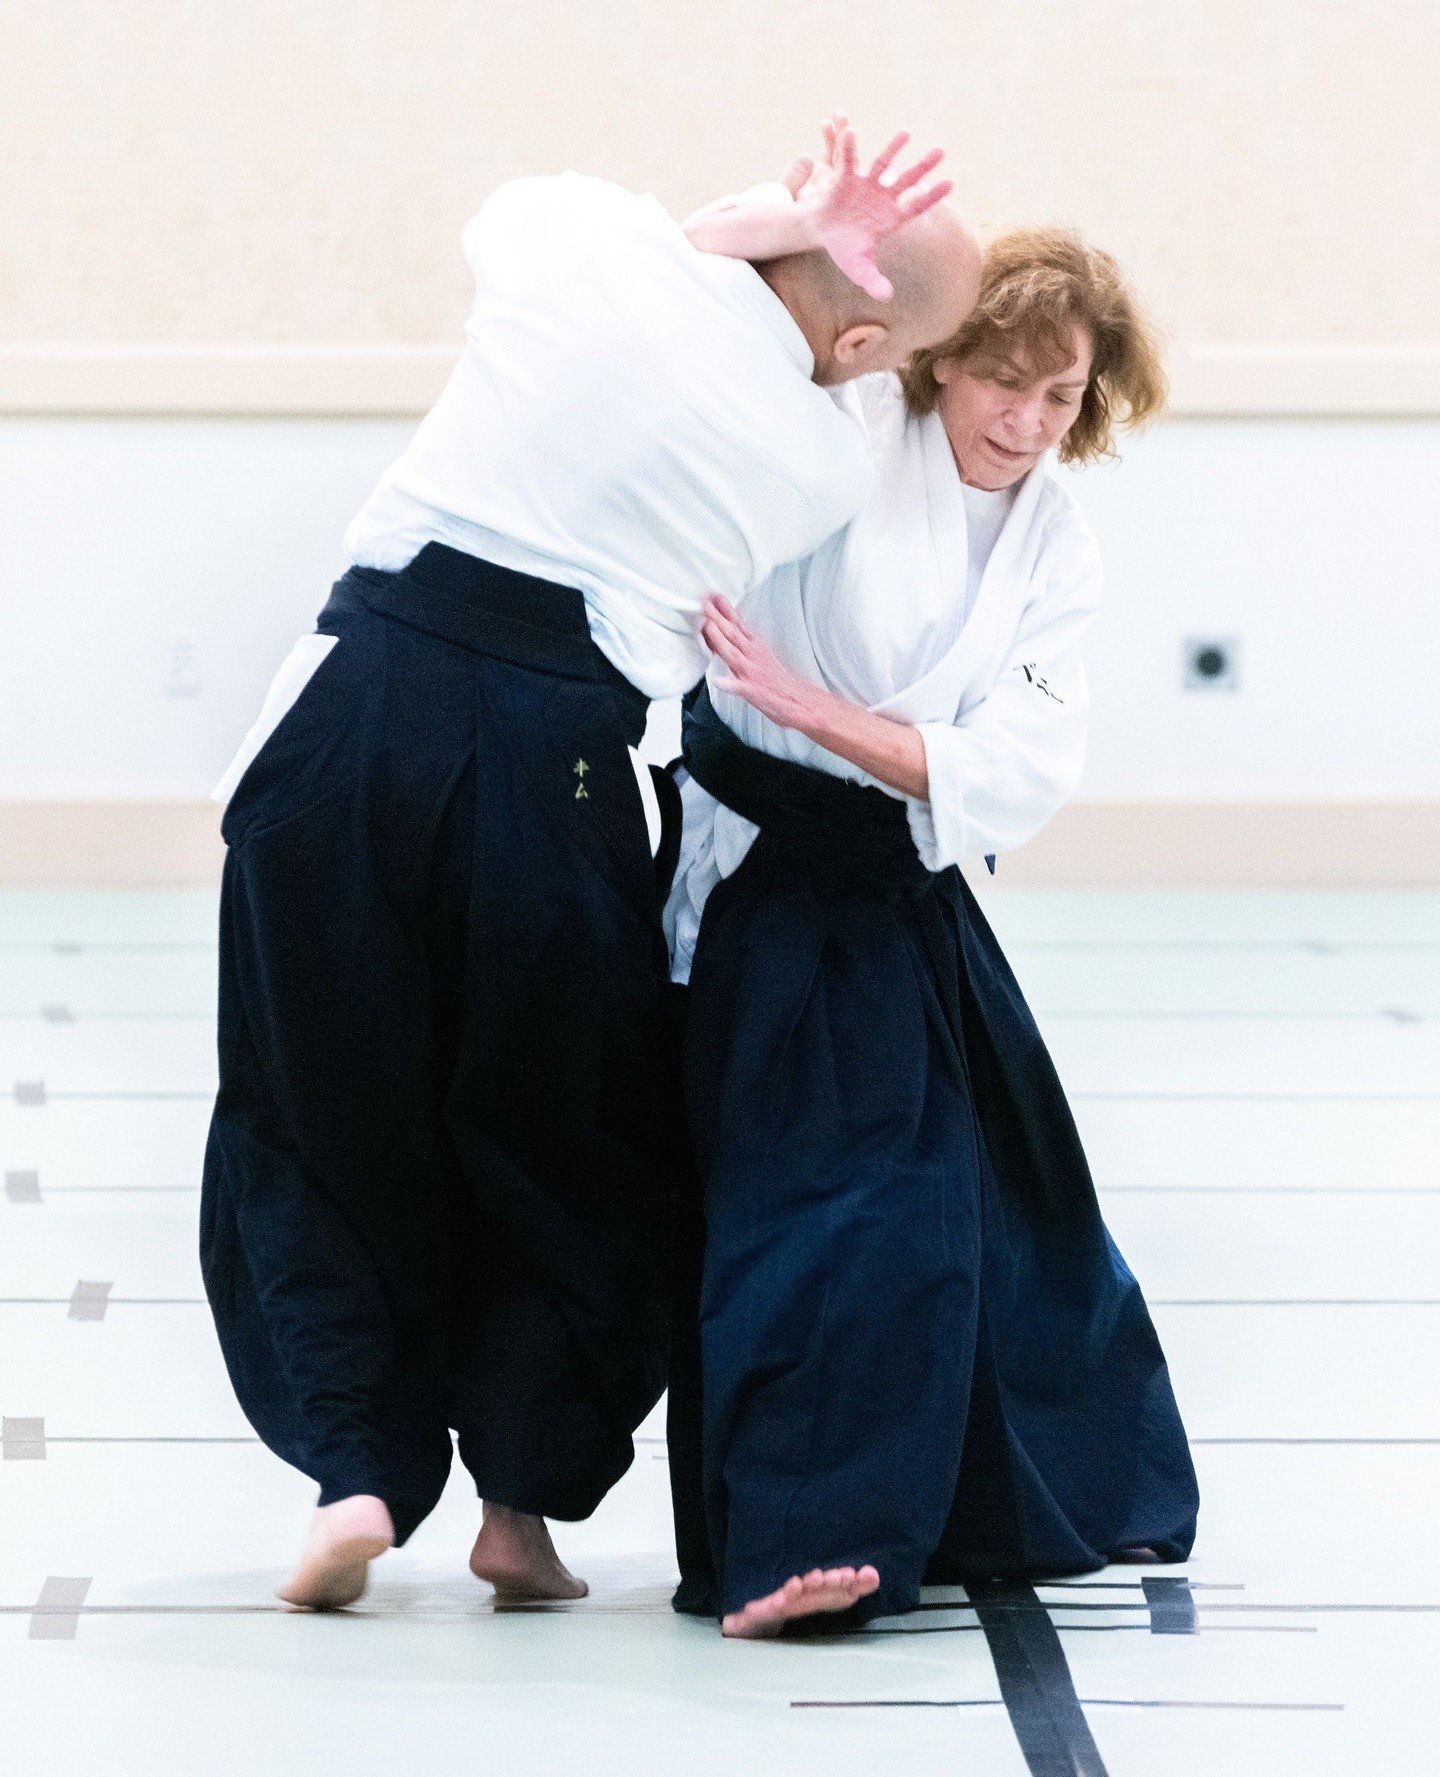 &quot;Aikido is empowerment, it has made me brave and strong&quot;⁠
⁠
Have you seen &quot;Penny Earned:  A Woman's Aikido Journey,&quot; the short film featuring Penny Bernath Sensei? Penny Sensei was the first woman on the USAF Technical Committee a